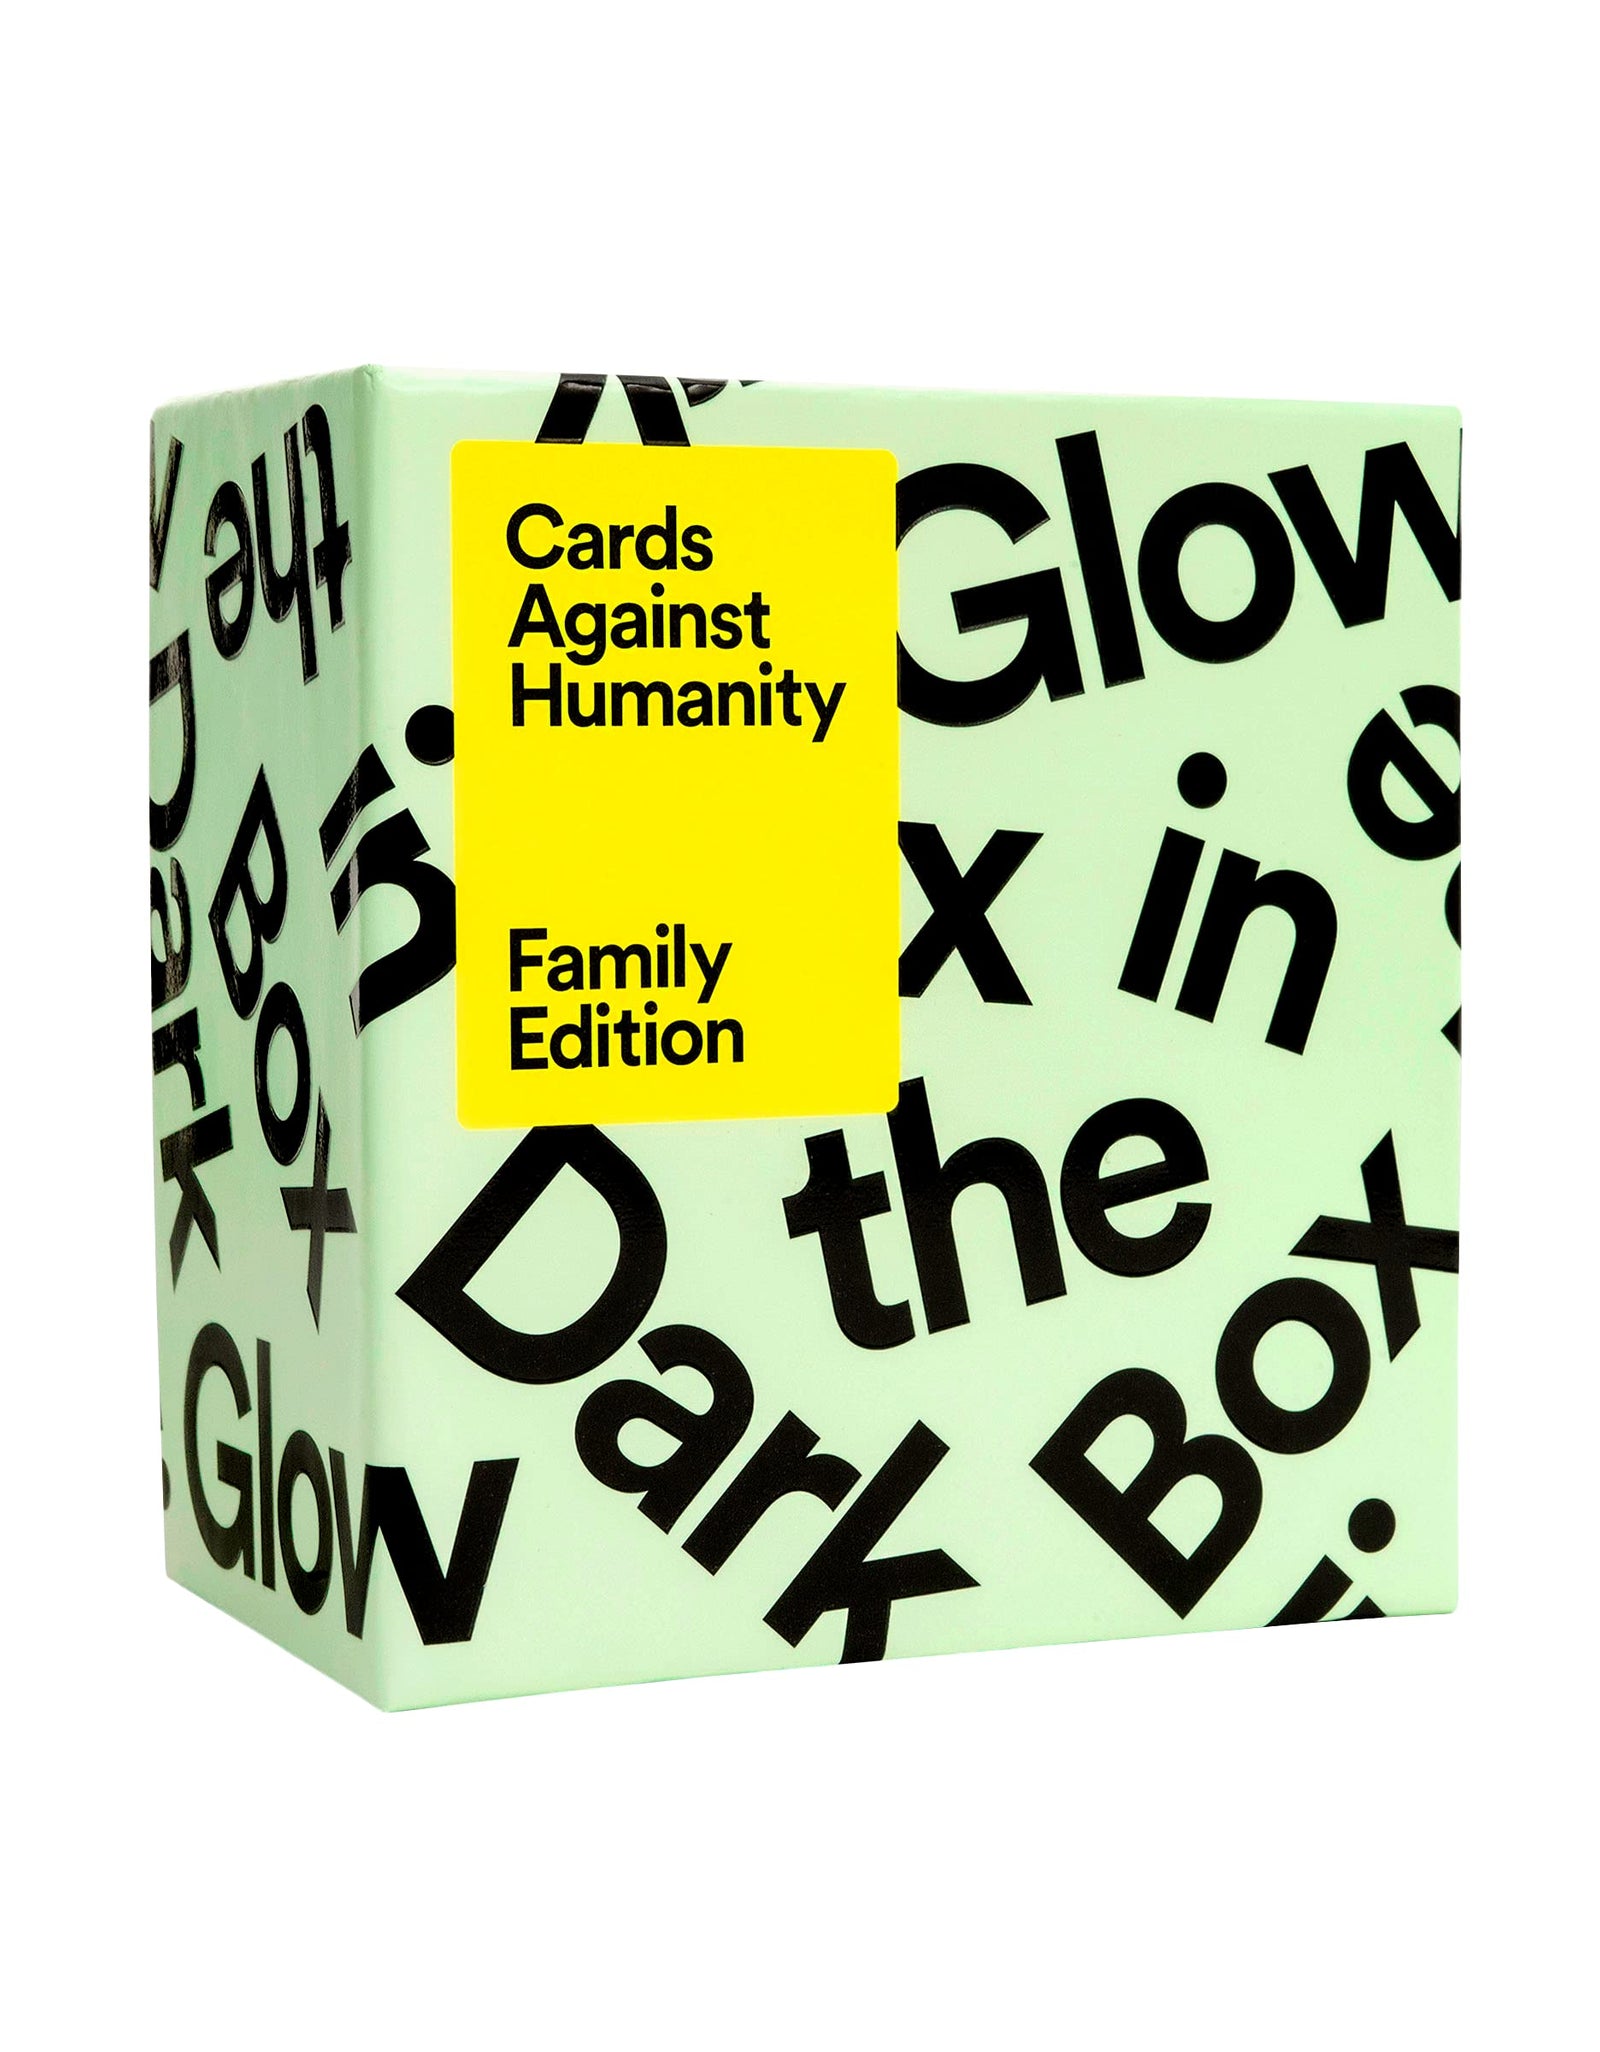 Cards Against Humanity Family Edition: Glow in The Dark Box • 300-Card Expansion